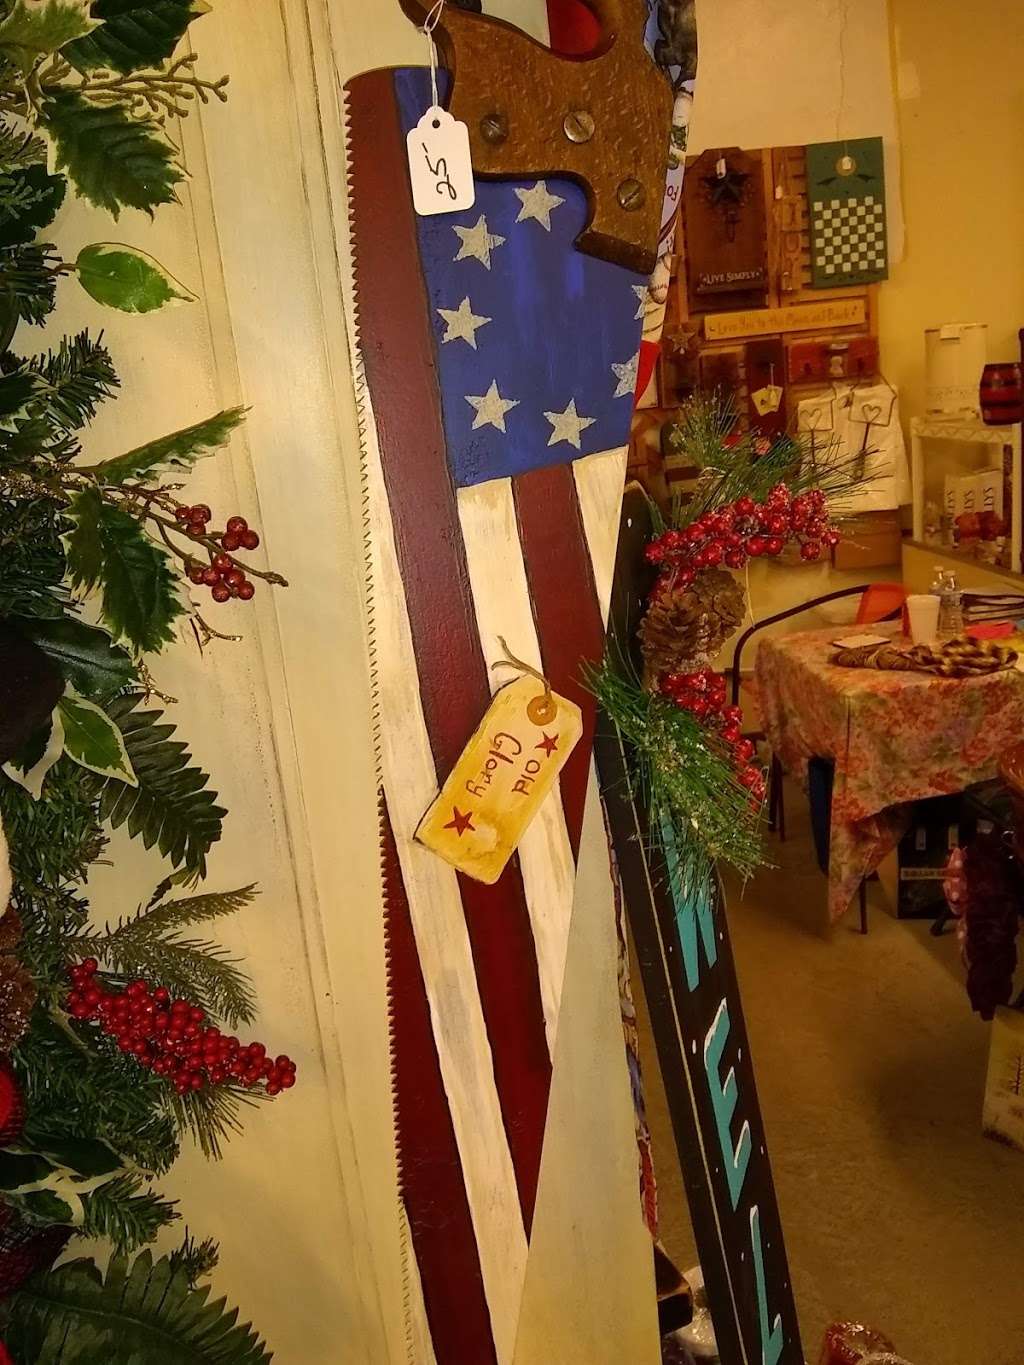 T & D Wreaths and More | 125 Mahanoy Ave, Tamaqua, PA 18252 | Phone: 484-464-5438